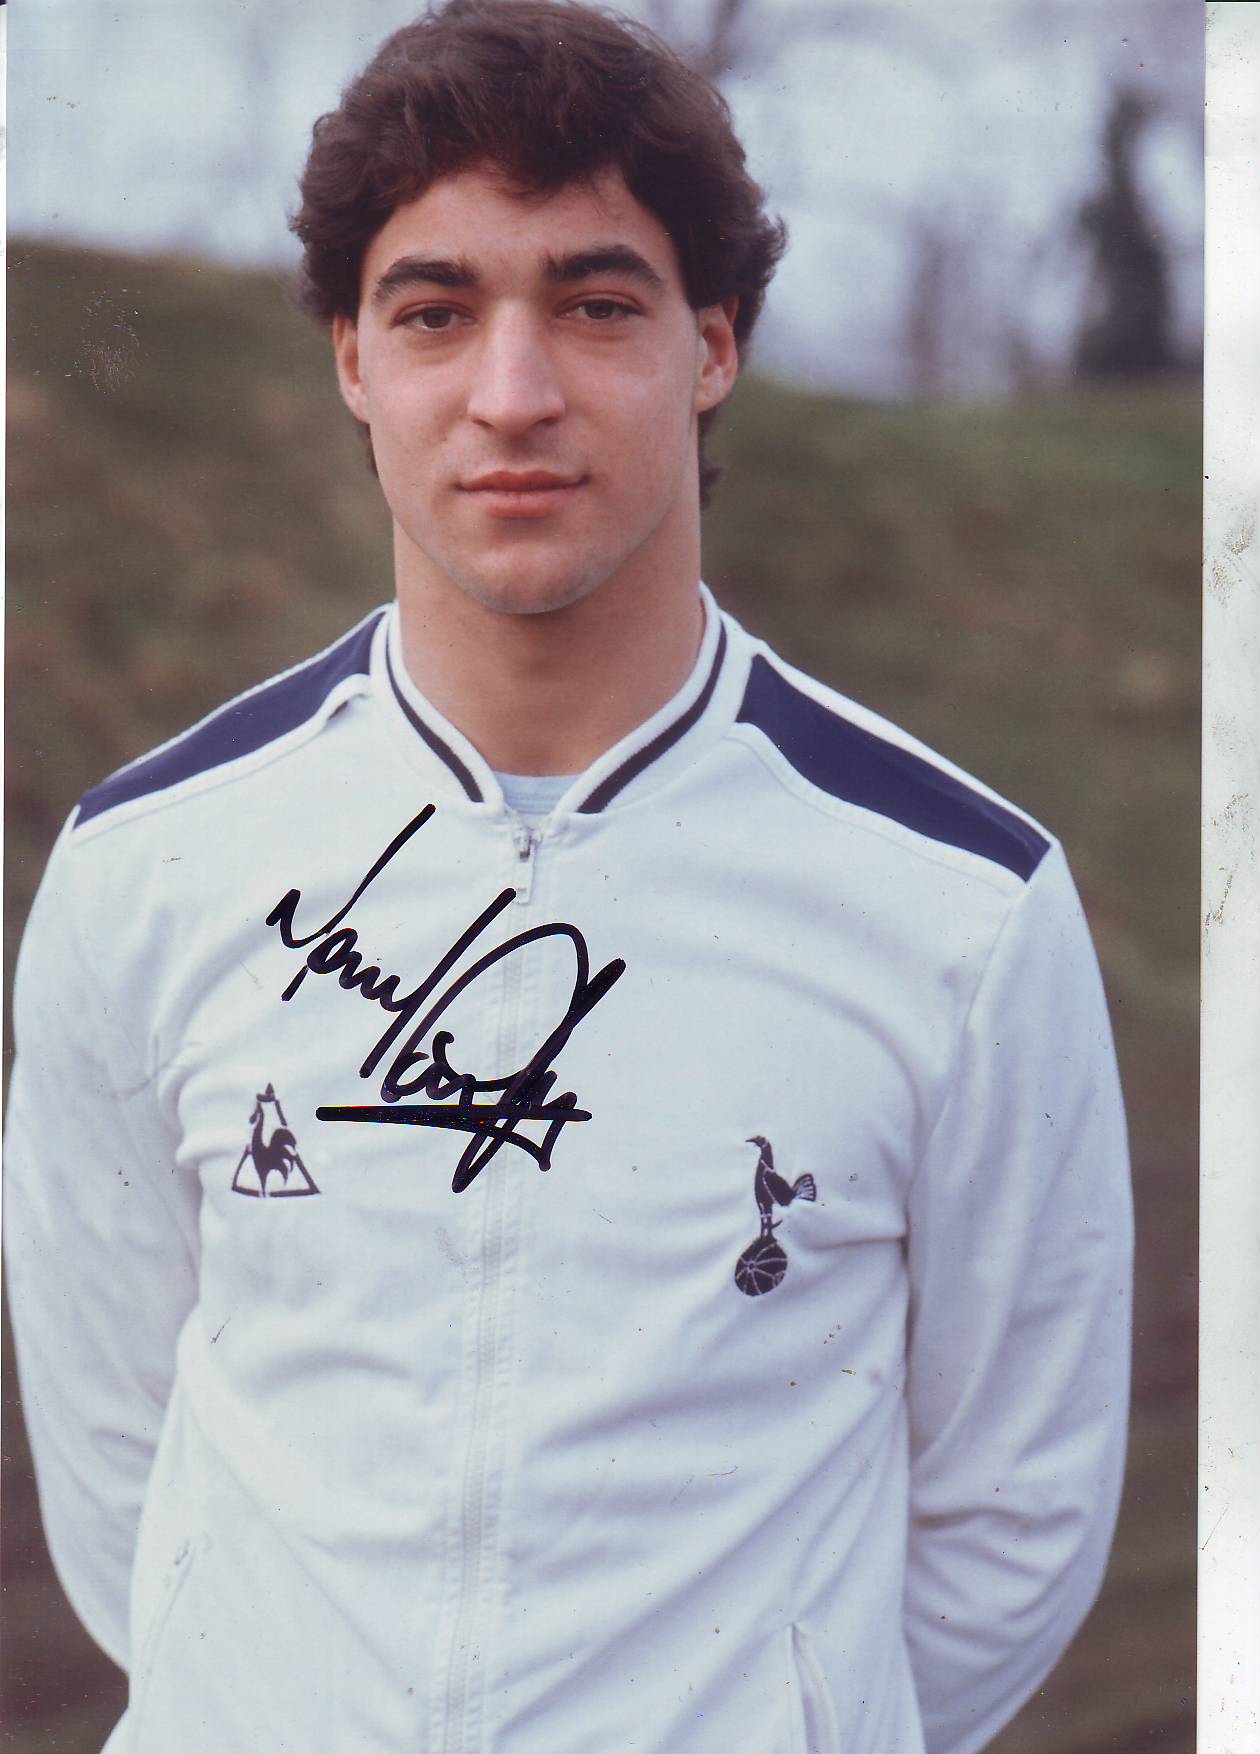 Tony Parks Colour 8x12 high quality action photo autographed by former Spurs goalkeeper Tony